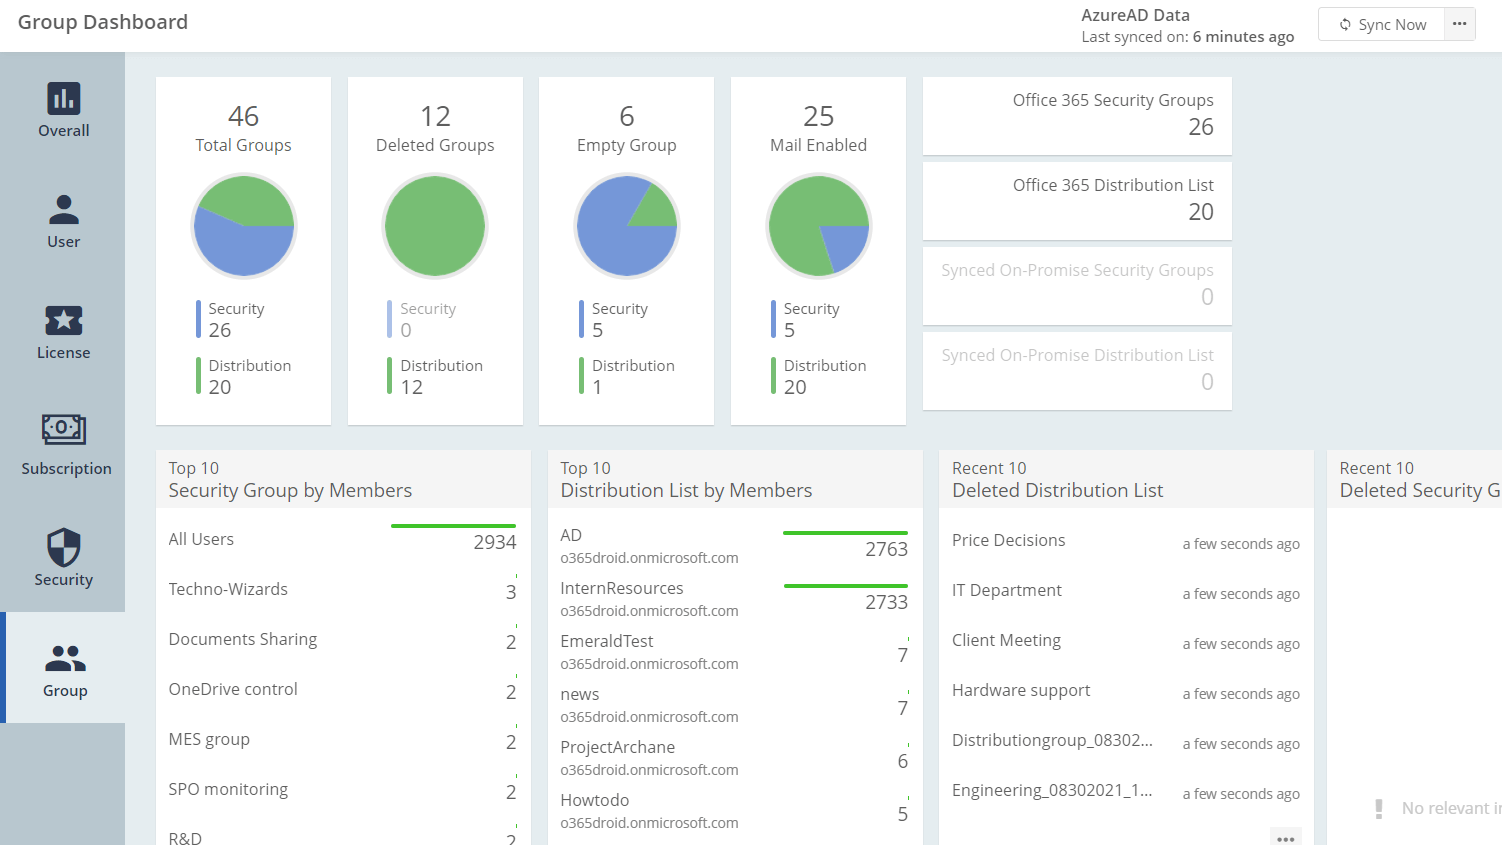 Office 365 Group Insights